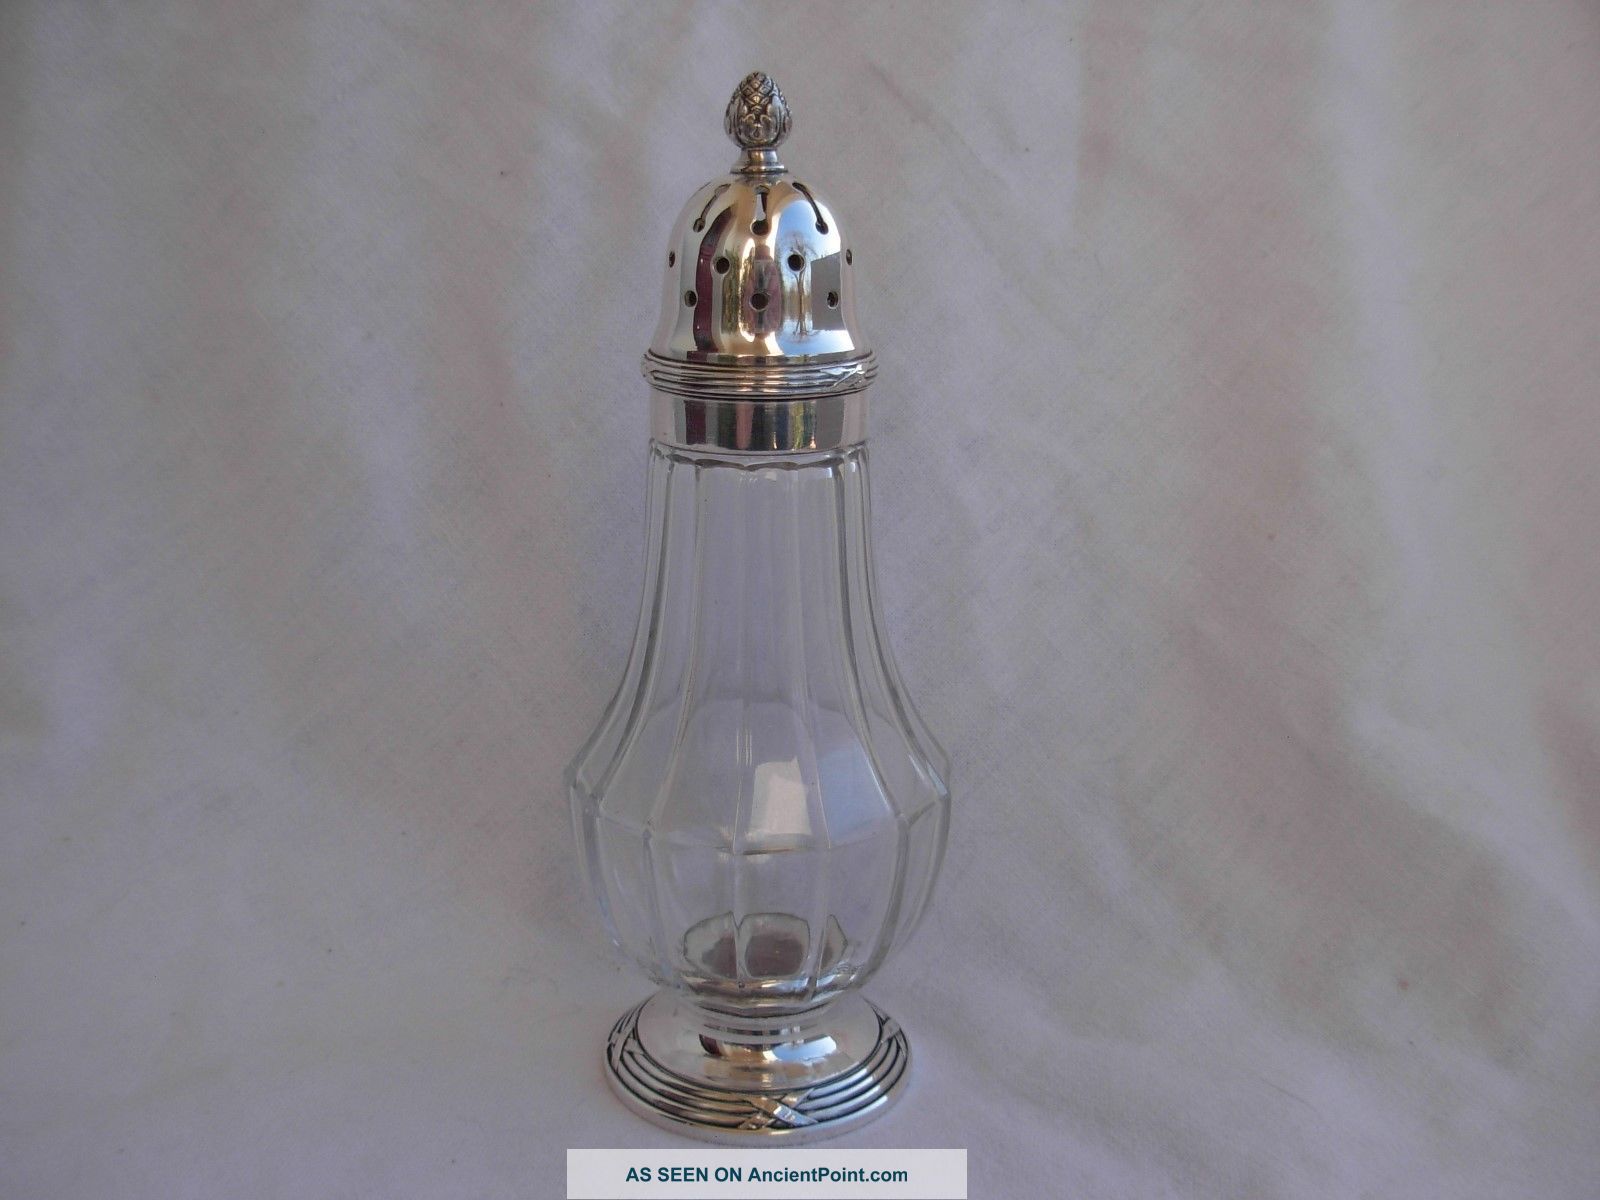 Christofle Silverplate Crystal Sugar Shaker Other Antique Silverplate photo